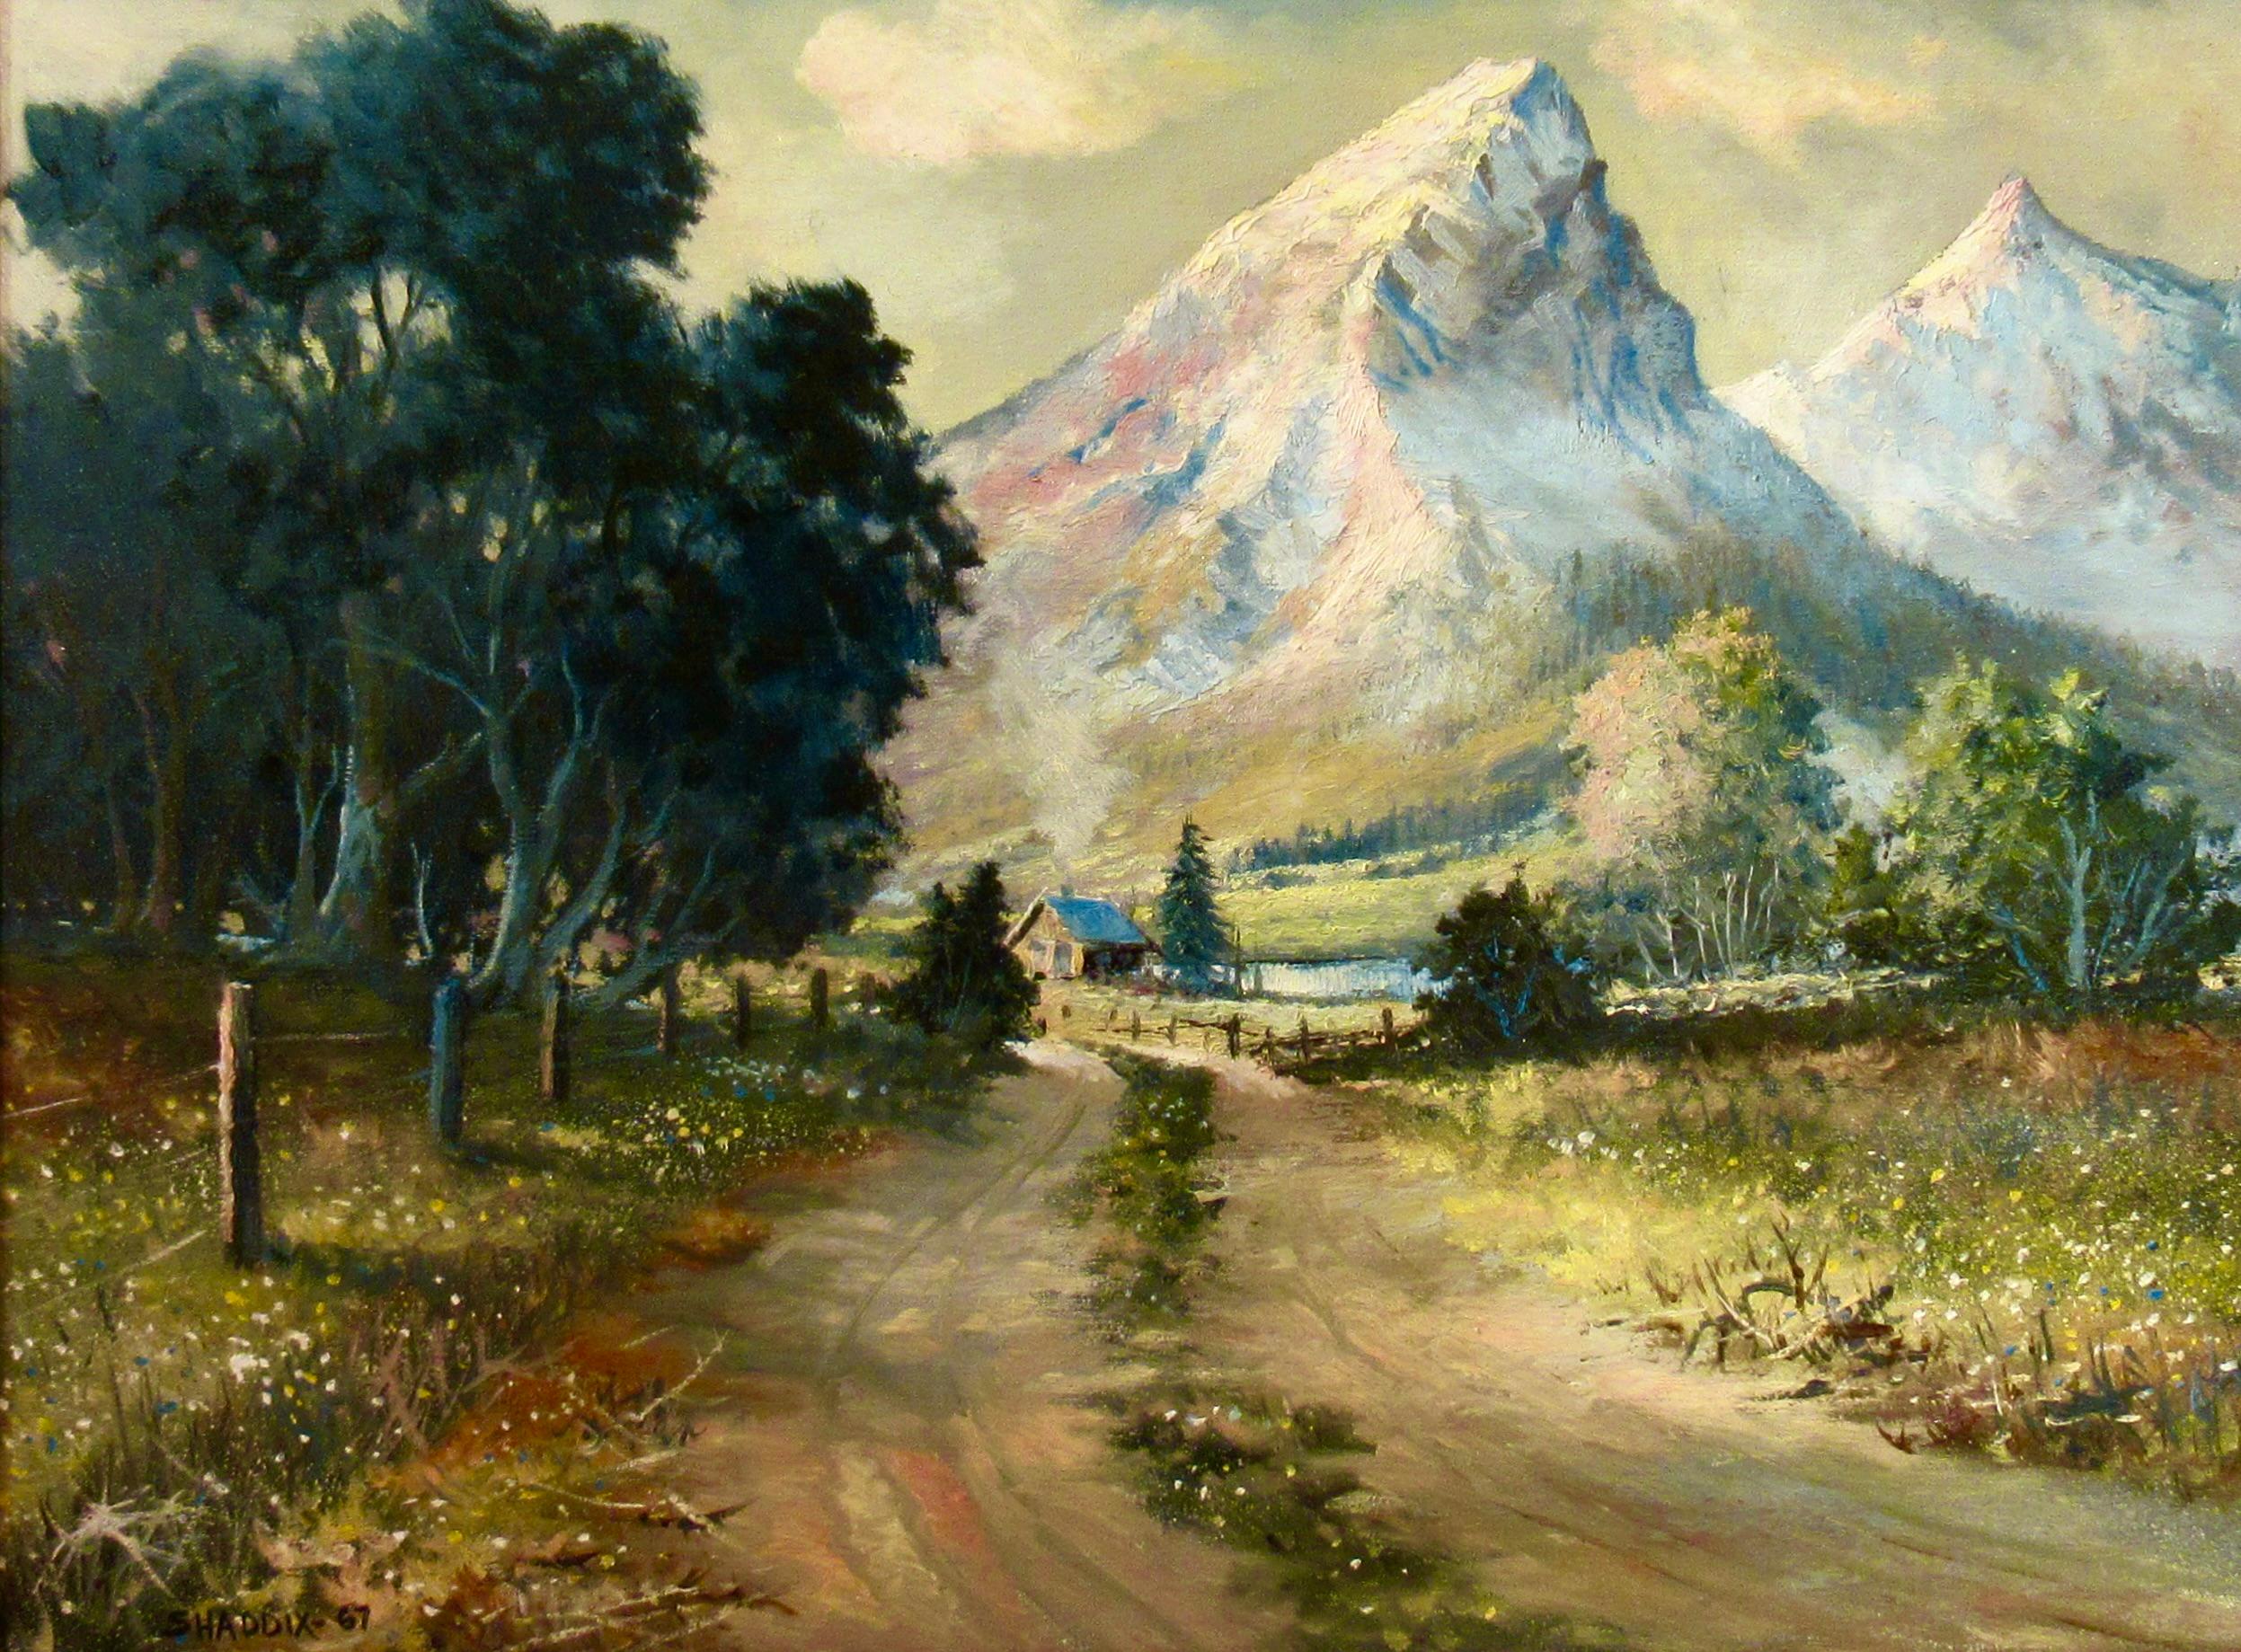 Evening in Jackson Hole - Painting by Bill Shaddix